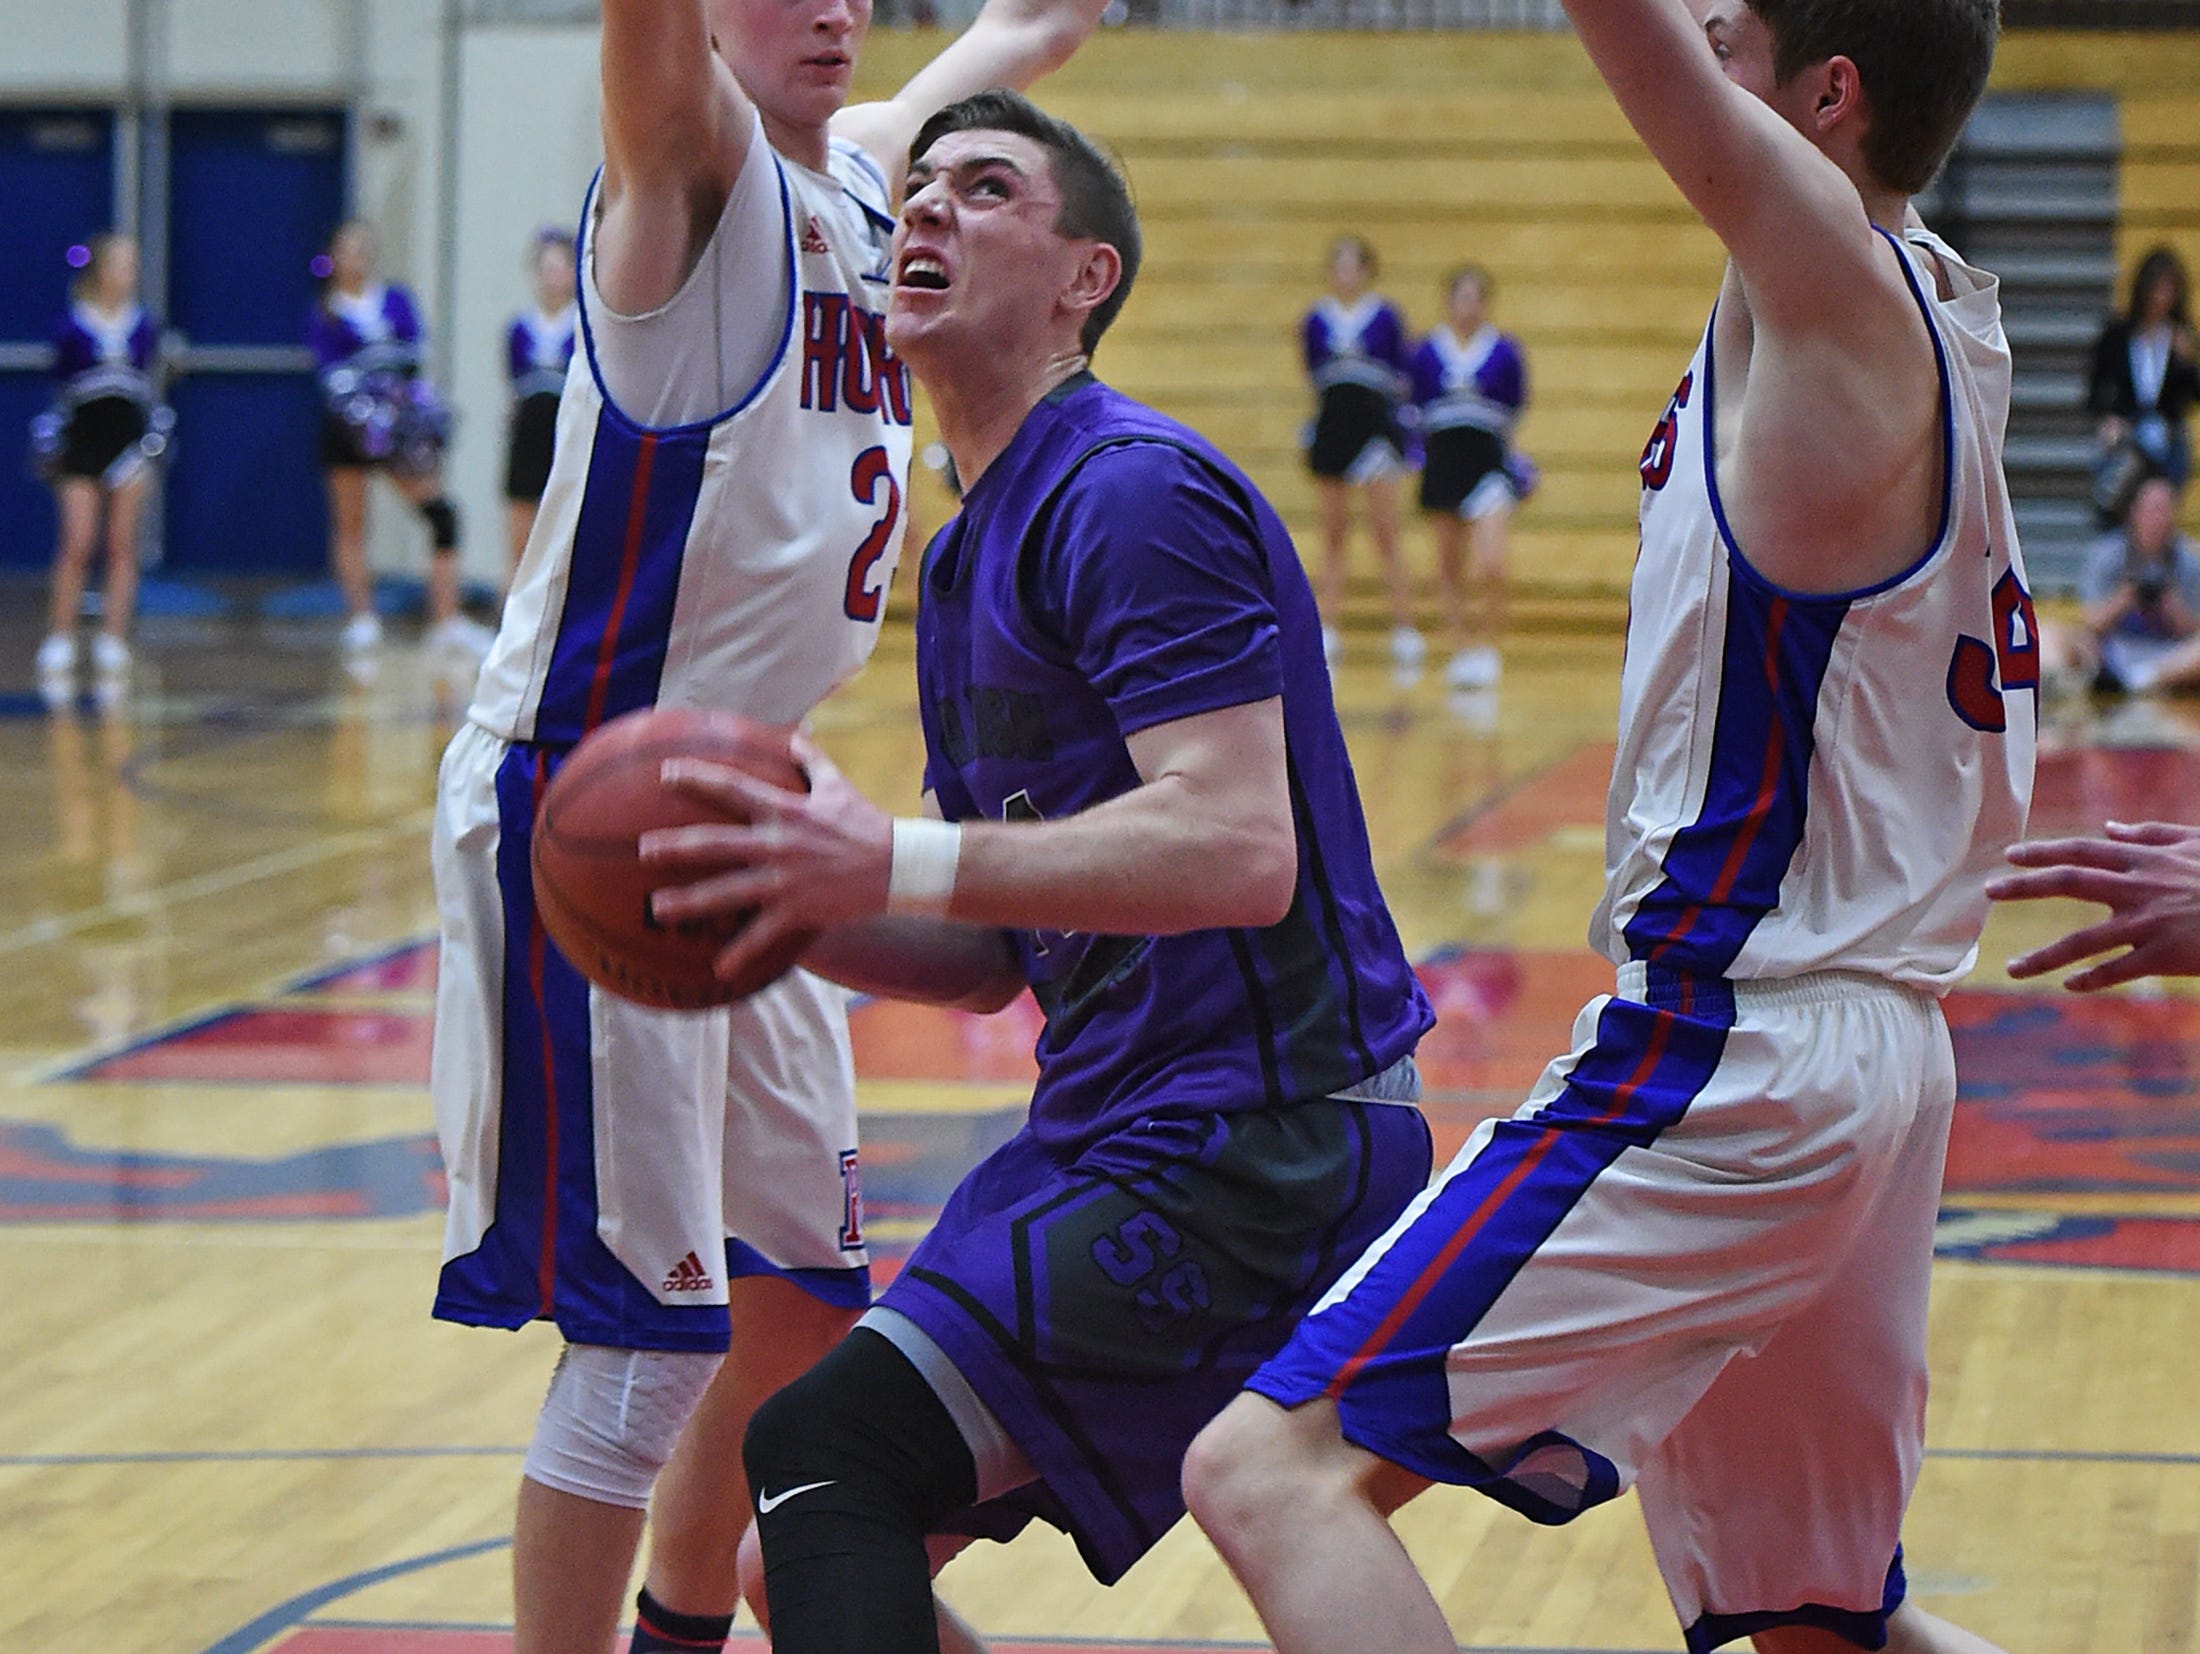 Spanish Springs' Josh Prizina looks to shoot with Reno's Drew Rippingham, left, and Tommy Challis guarding on Feb. 7. Przina and the Cougars are looking for their first Regional title.